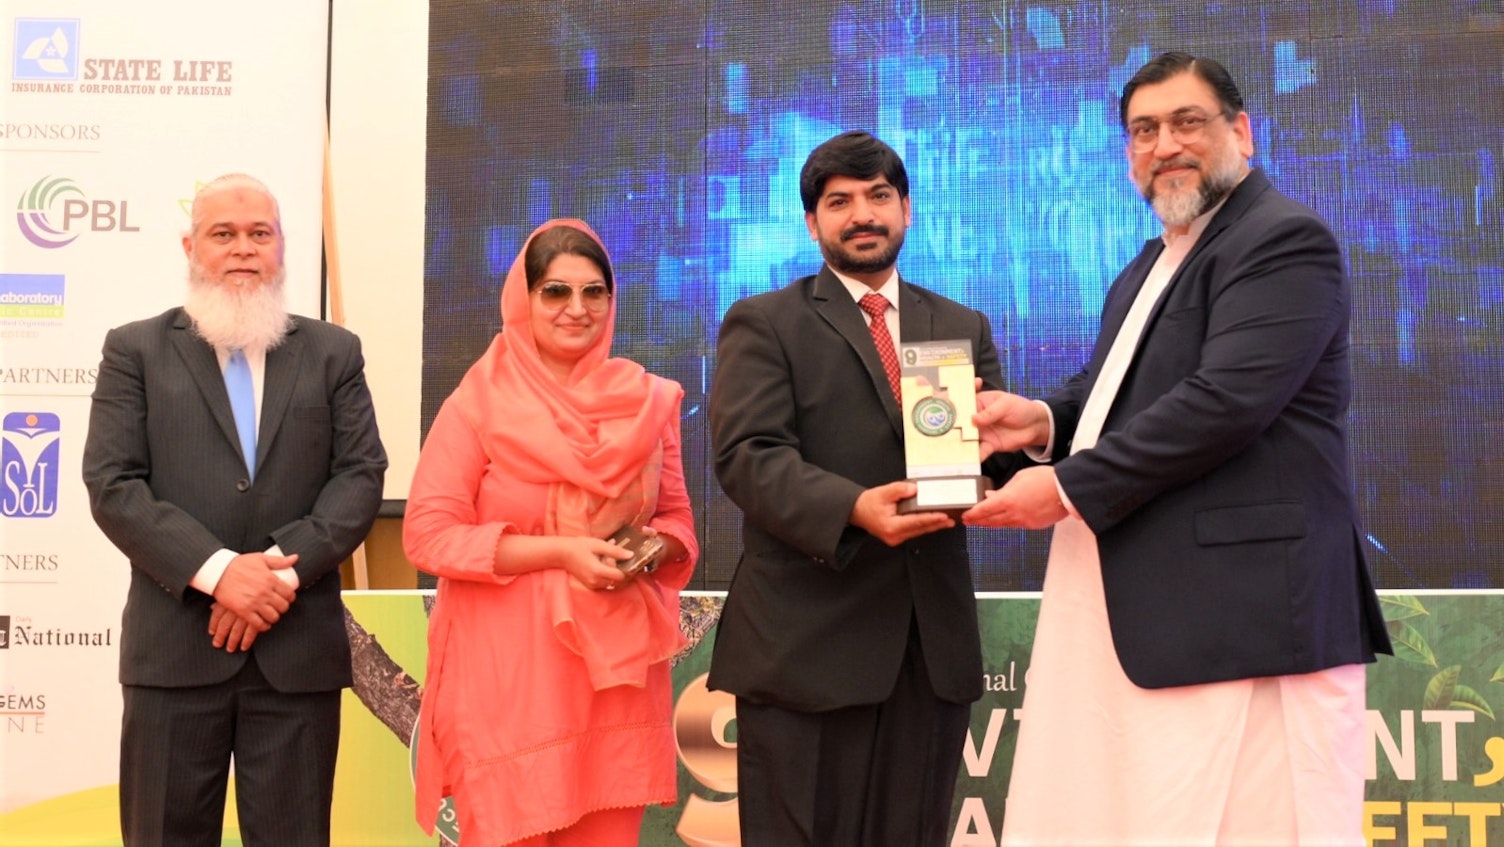 SGS Pakistan Wins International EHS Award 2023 for Innovation and Sustainable Solutions